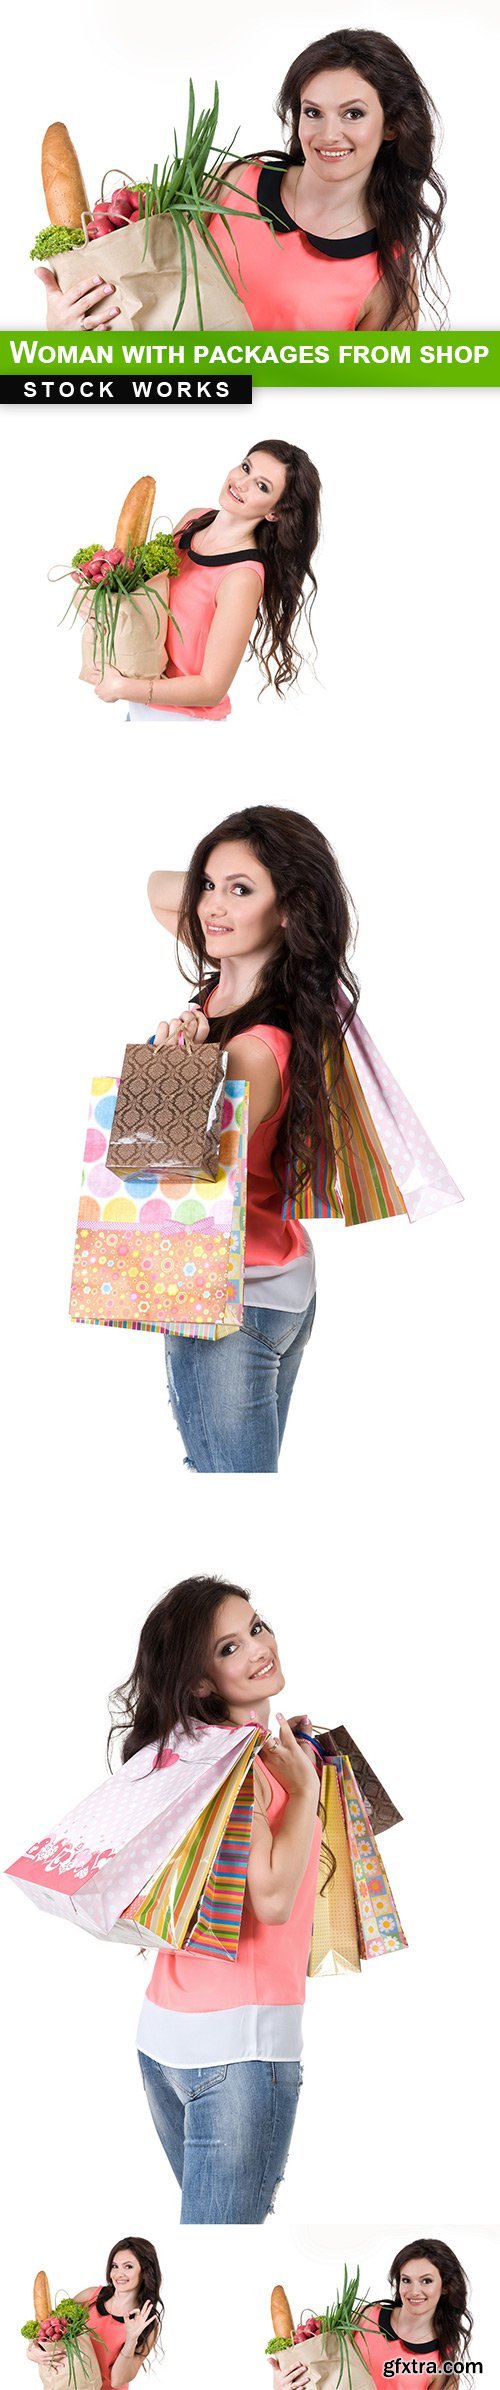 Woman with packages from shop - 5 UHQ JPEG